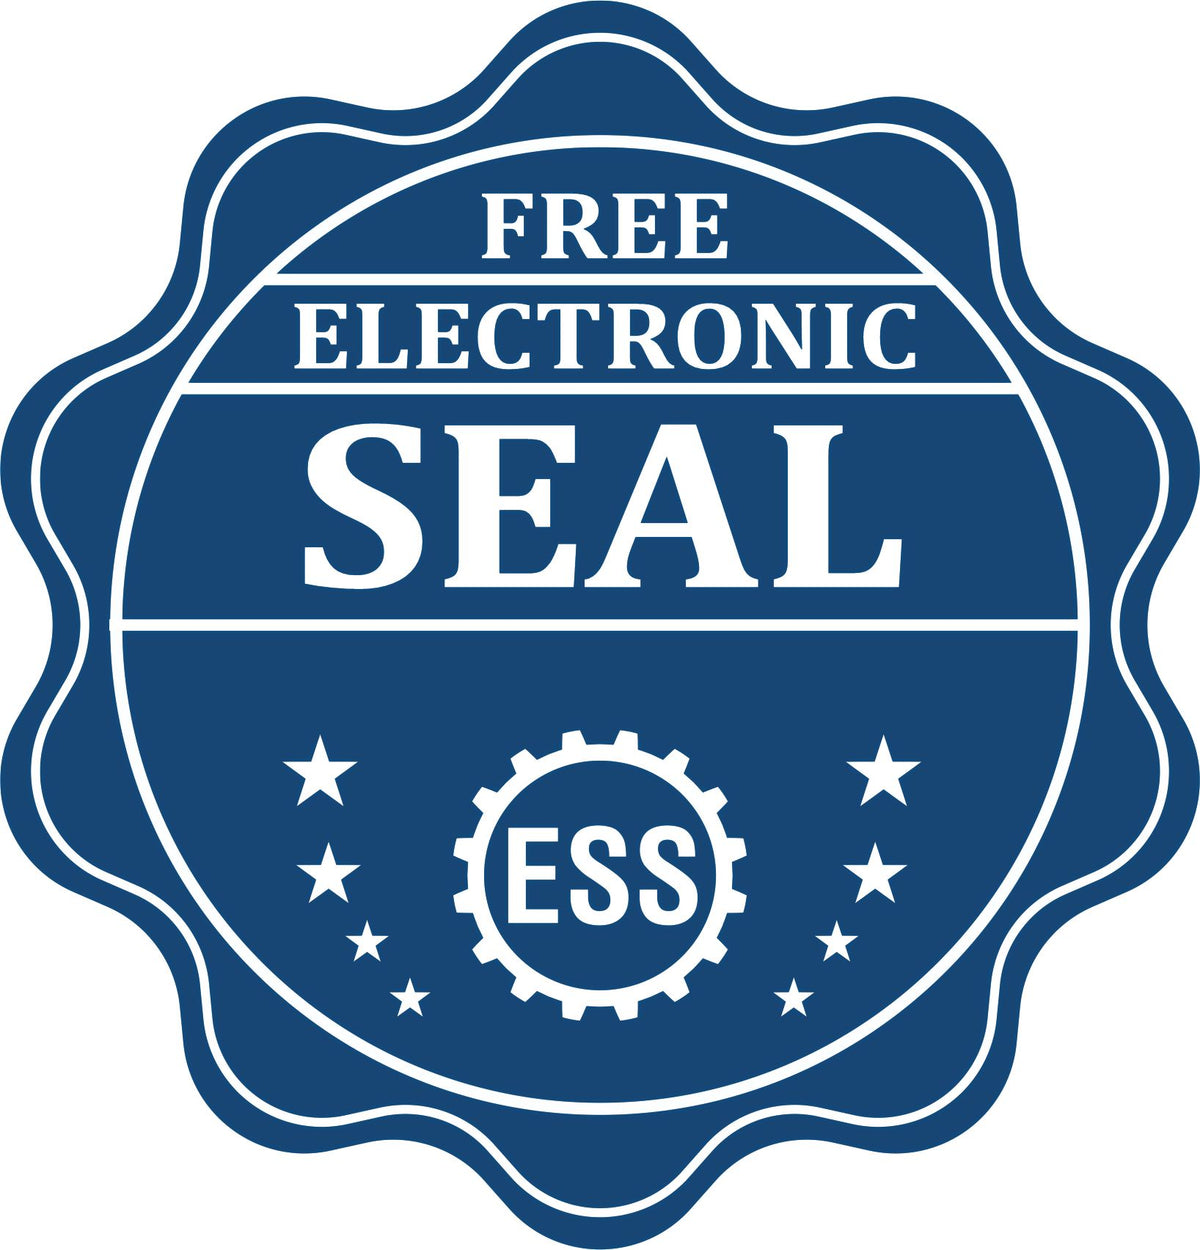 A badge showing a free electronic seal for the Handheld Alaska Professional Engineer Embosser with stars and the ESS gear on the emblem.